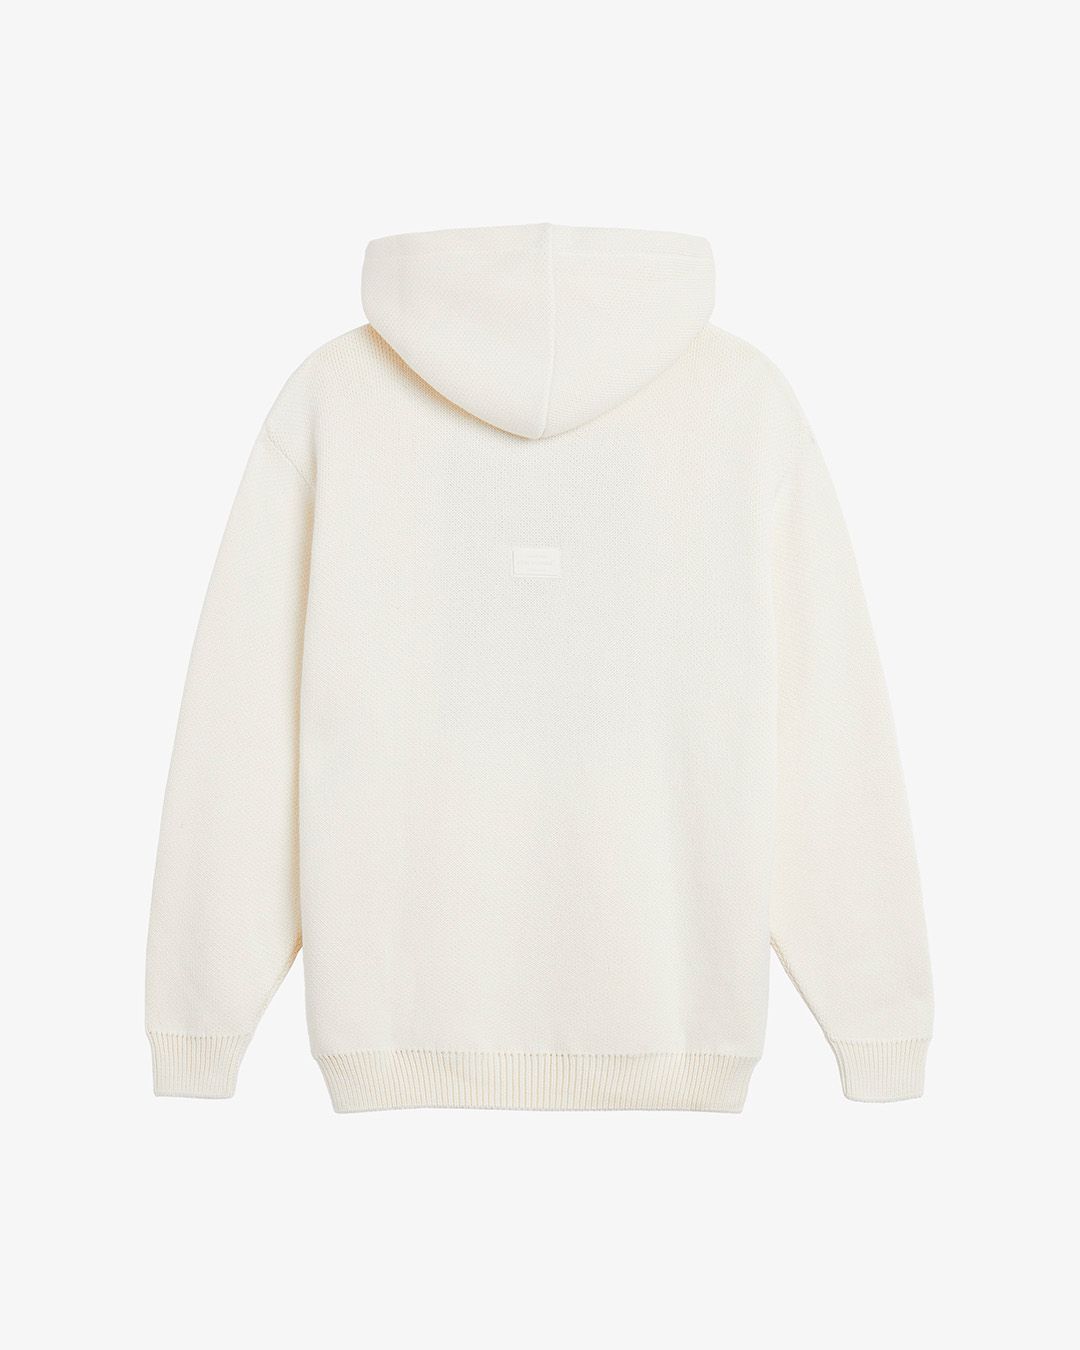 The Knitted Hoodie